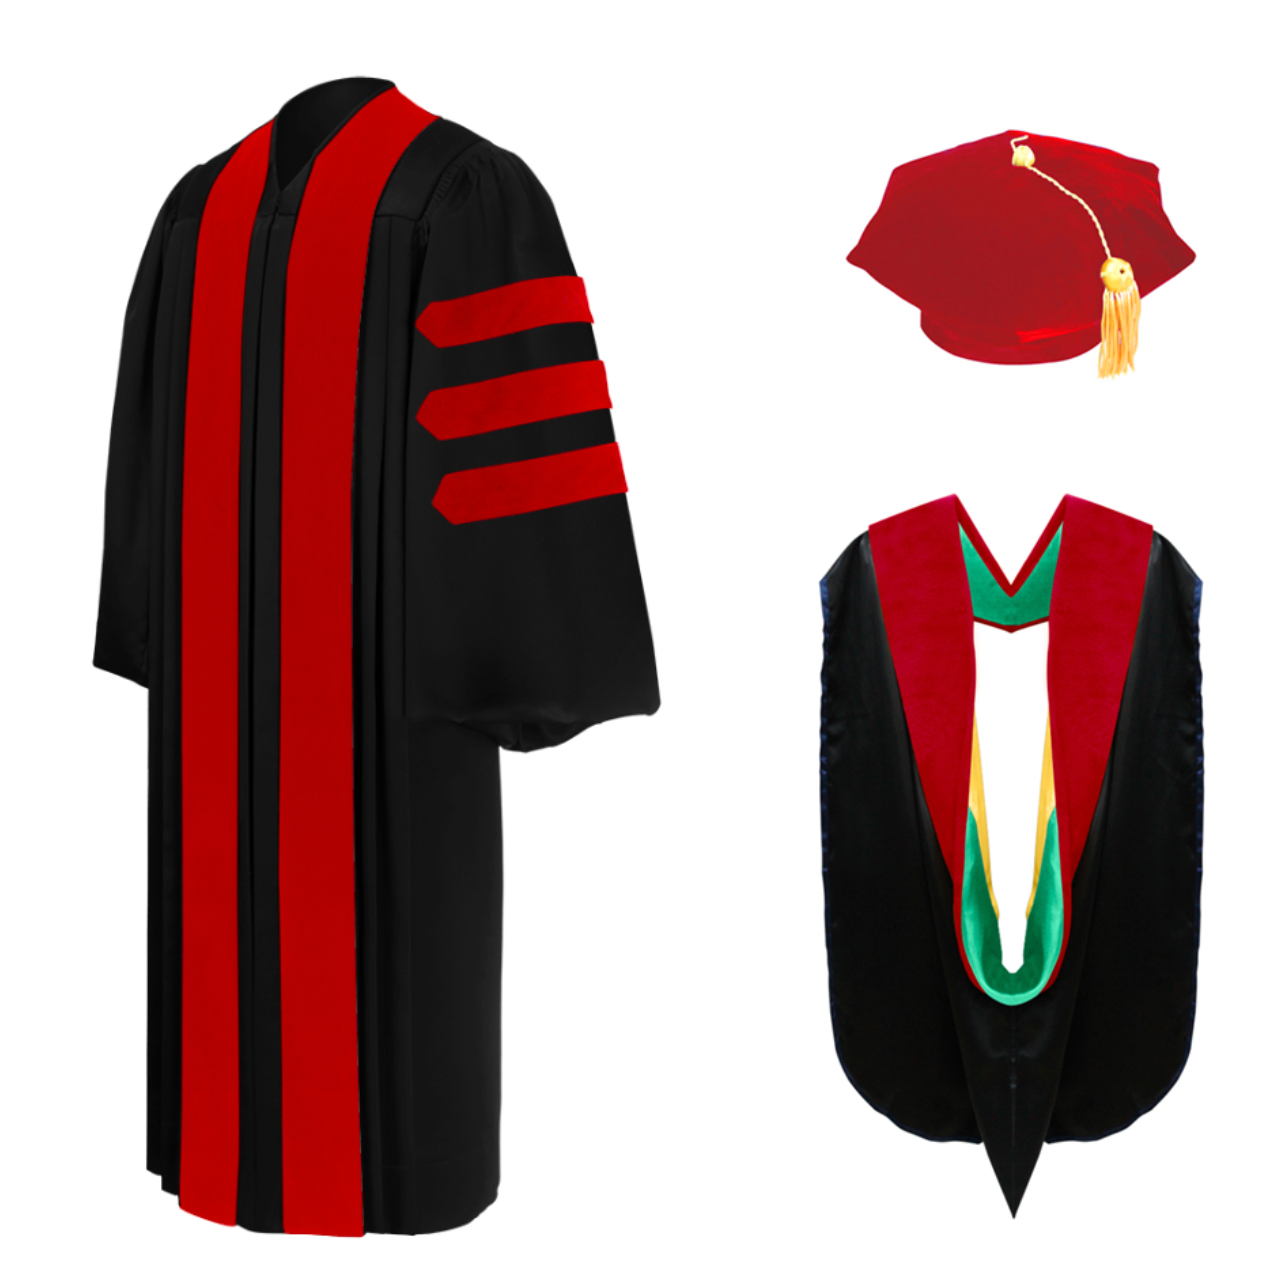 Doctorate Hood - UoA - Doctoral Degree - Browse by Academic Qualification -  Purchase Graduation Regalia - Out 'n About Graduation Regalia